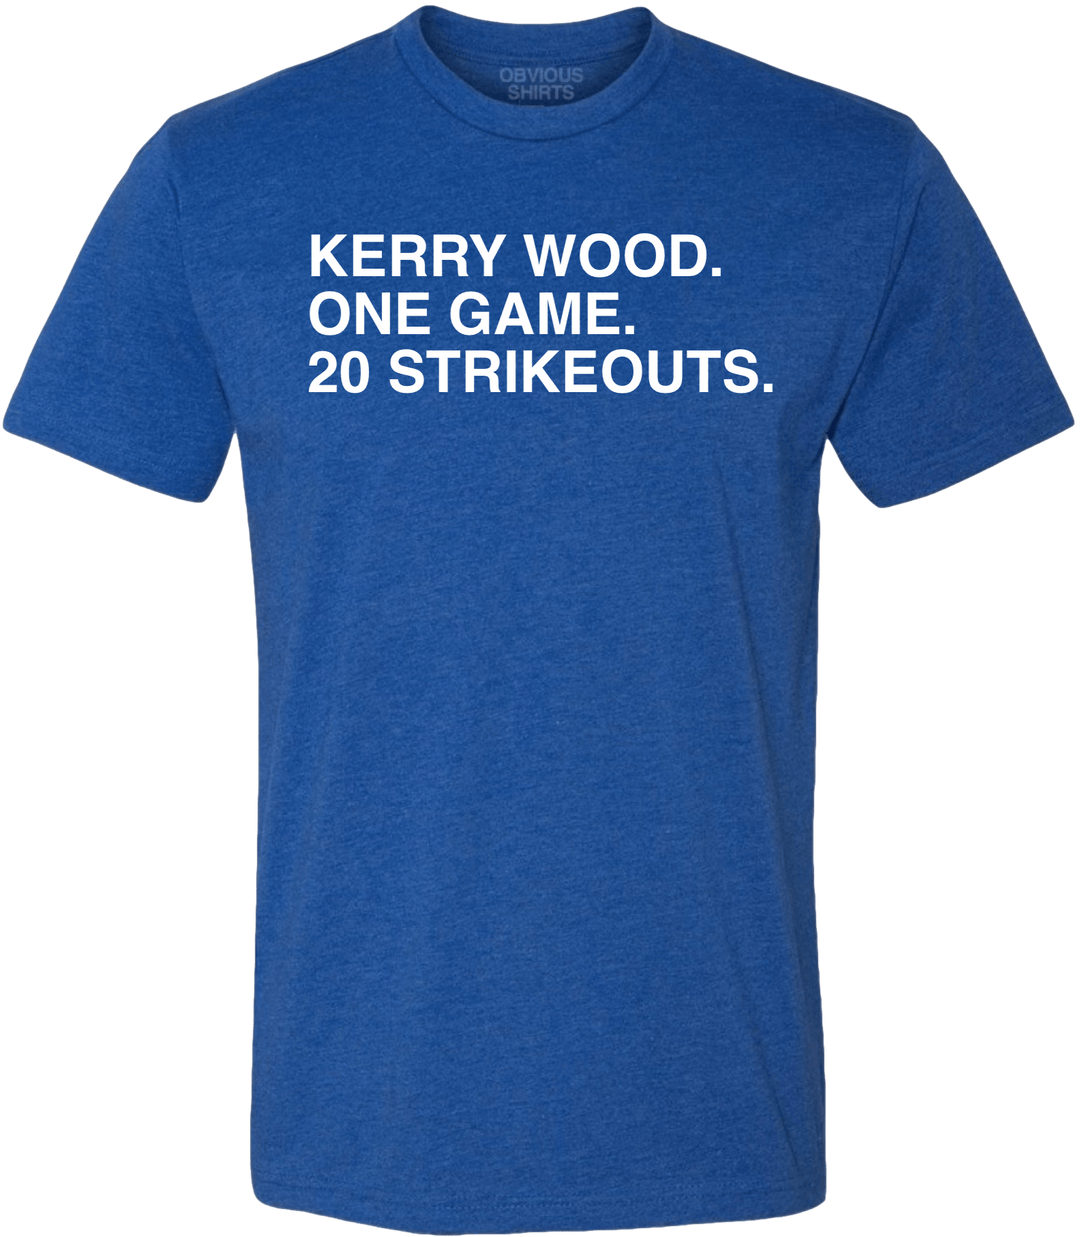 KERRY WOOD. ONE GAME. 20 STRIKEOUTS. - OBVIOUS SHIRTS